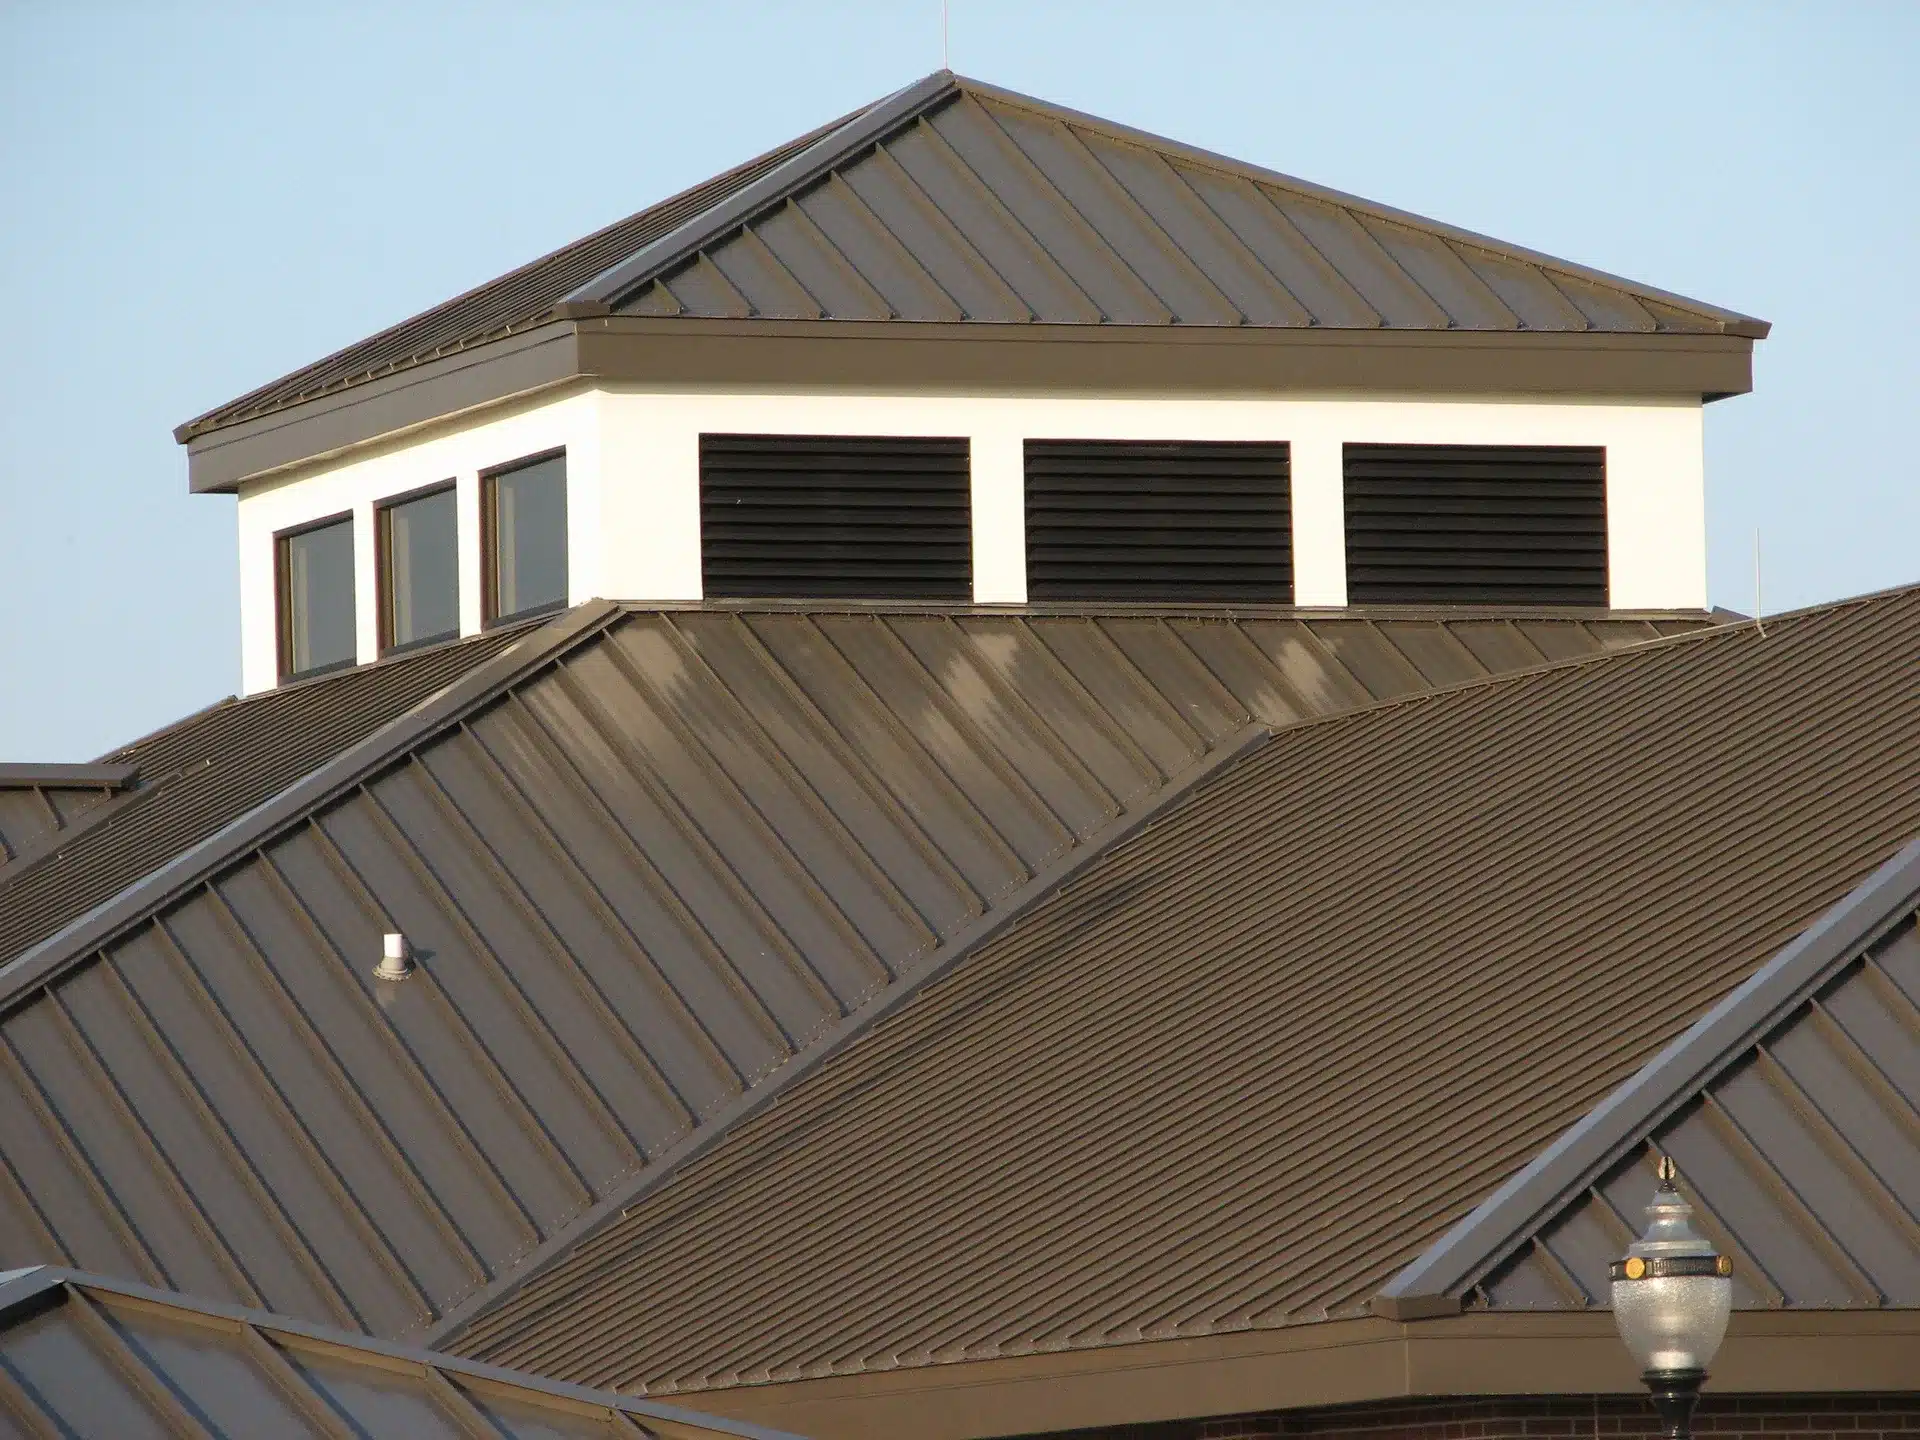 What Is The Biggest Problem With Metal Roofs